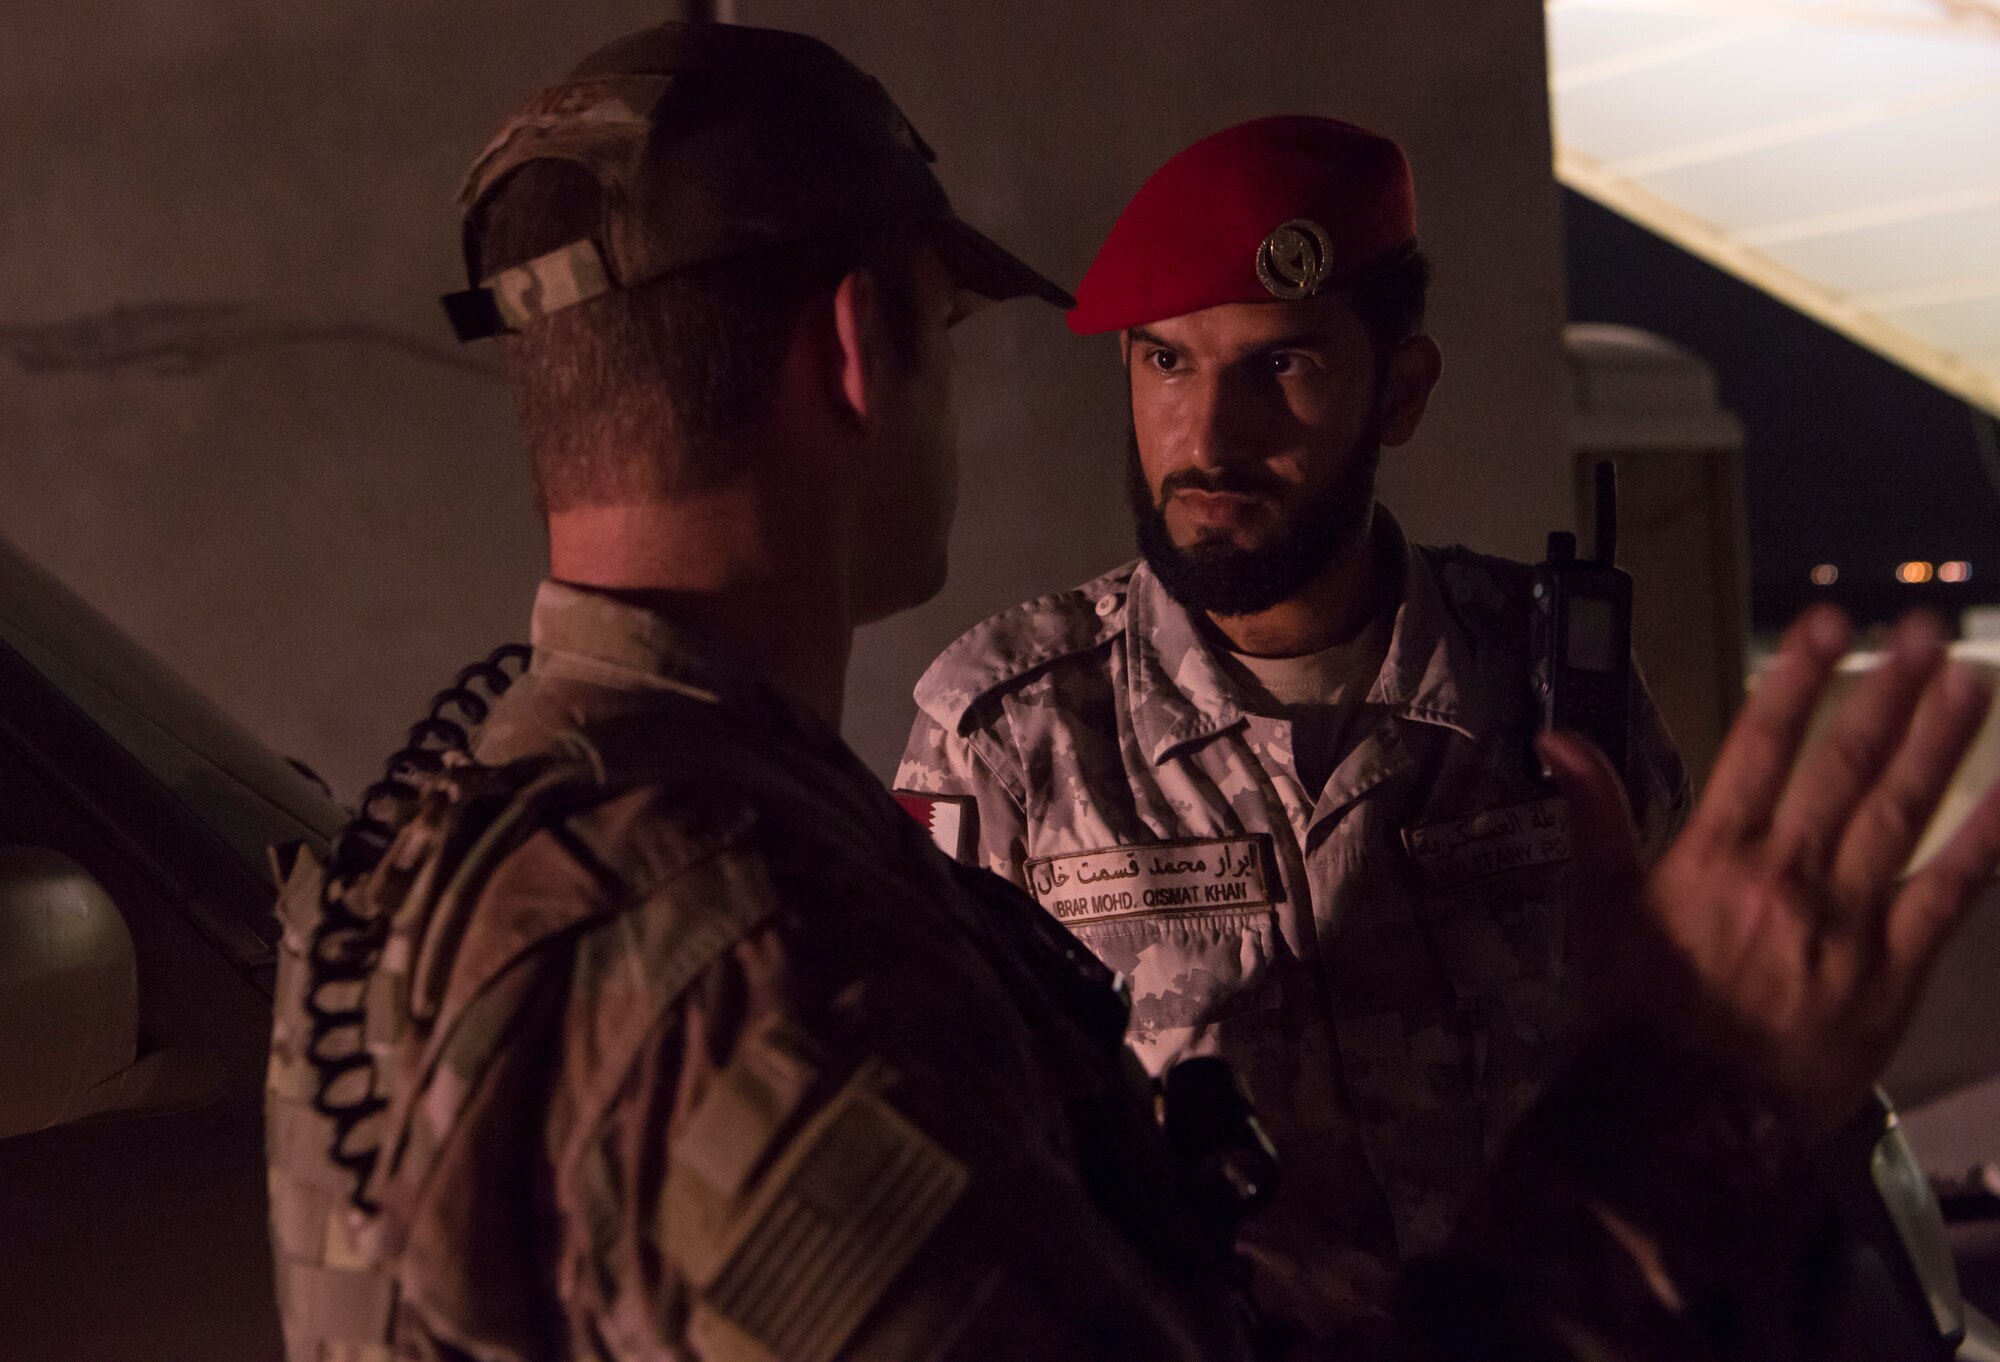 Master Sgt. Jordan Barnes, left, 379th Expeditionary Security Forces Squadron (ESFS) combined response joint patrol leader, talks to Qatar Military Police (QMP) Soldier Ibrar Mohd. Qismat Khan, prior to conducting a “Spartan Patrol” Jan. 17, 2019, at Al Udeid Air Base, Qatar. Barnes conducts Spartan Patrols, where he works side-by-side with the QMP to conduct installation perimeter checks. Together, members of 379th ESFS and QMP ensure assets and personnel are safe at Al Udeid, and there are no vulnerabilities in the installation’s perimeter. (U.S. Air Force photo by Tech. Sgt. Christopher Hubenthal)